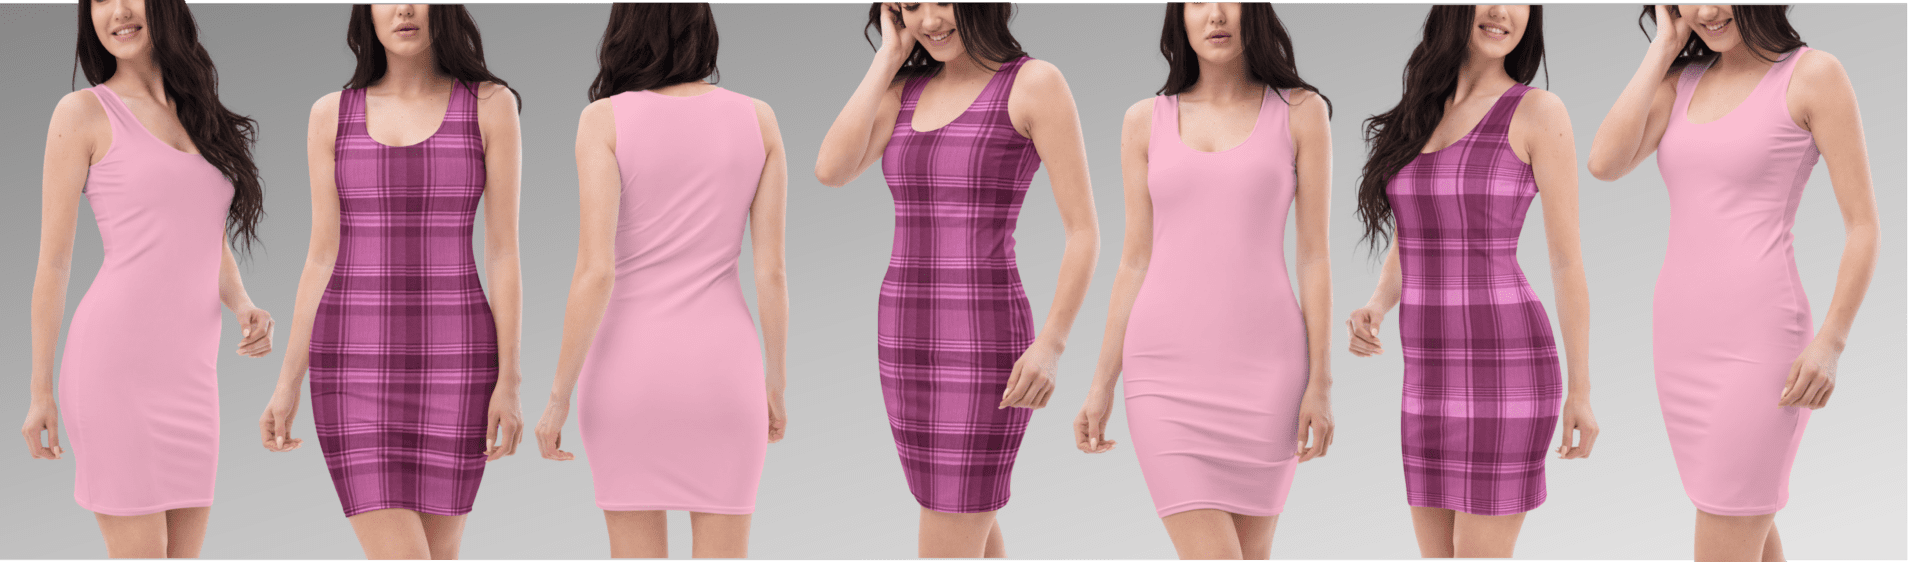 Pink and plaid dresses on models.